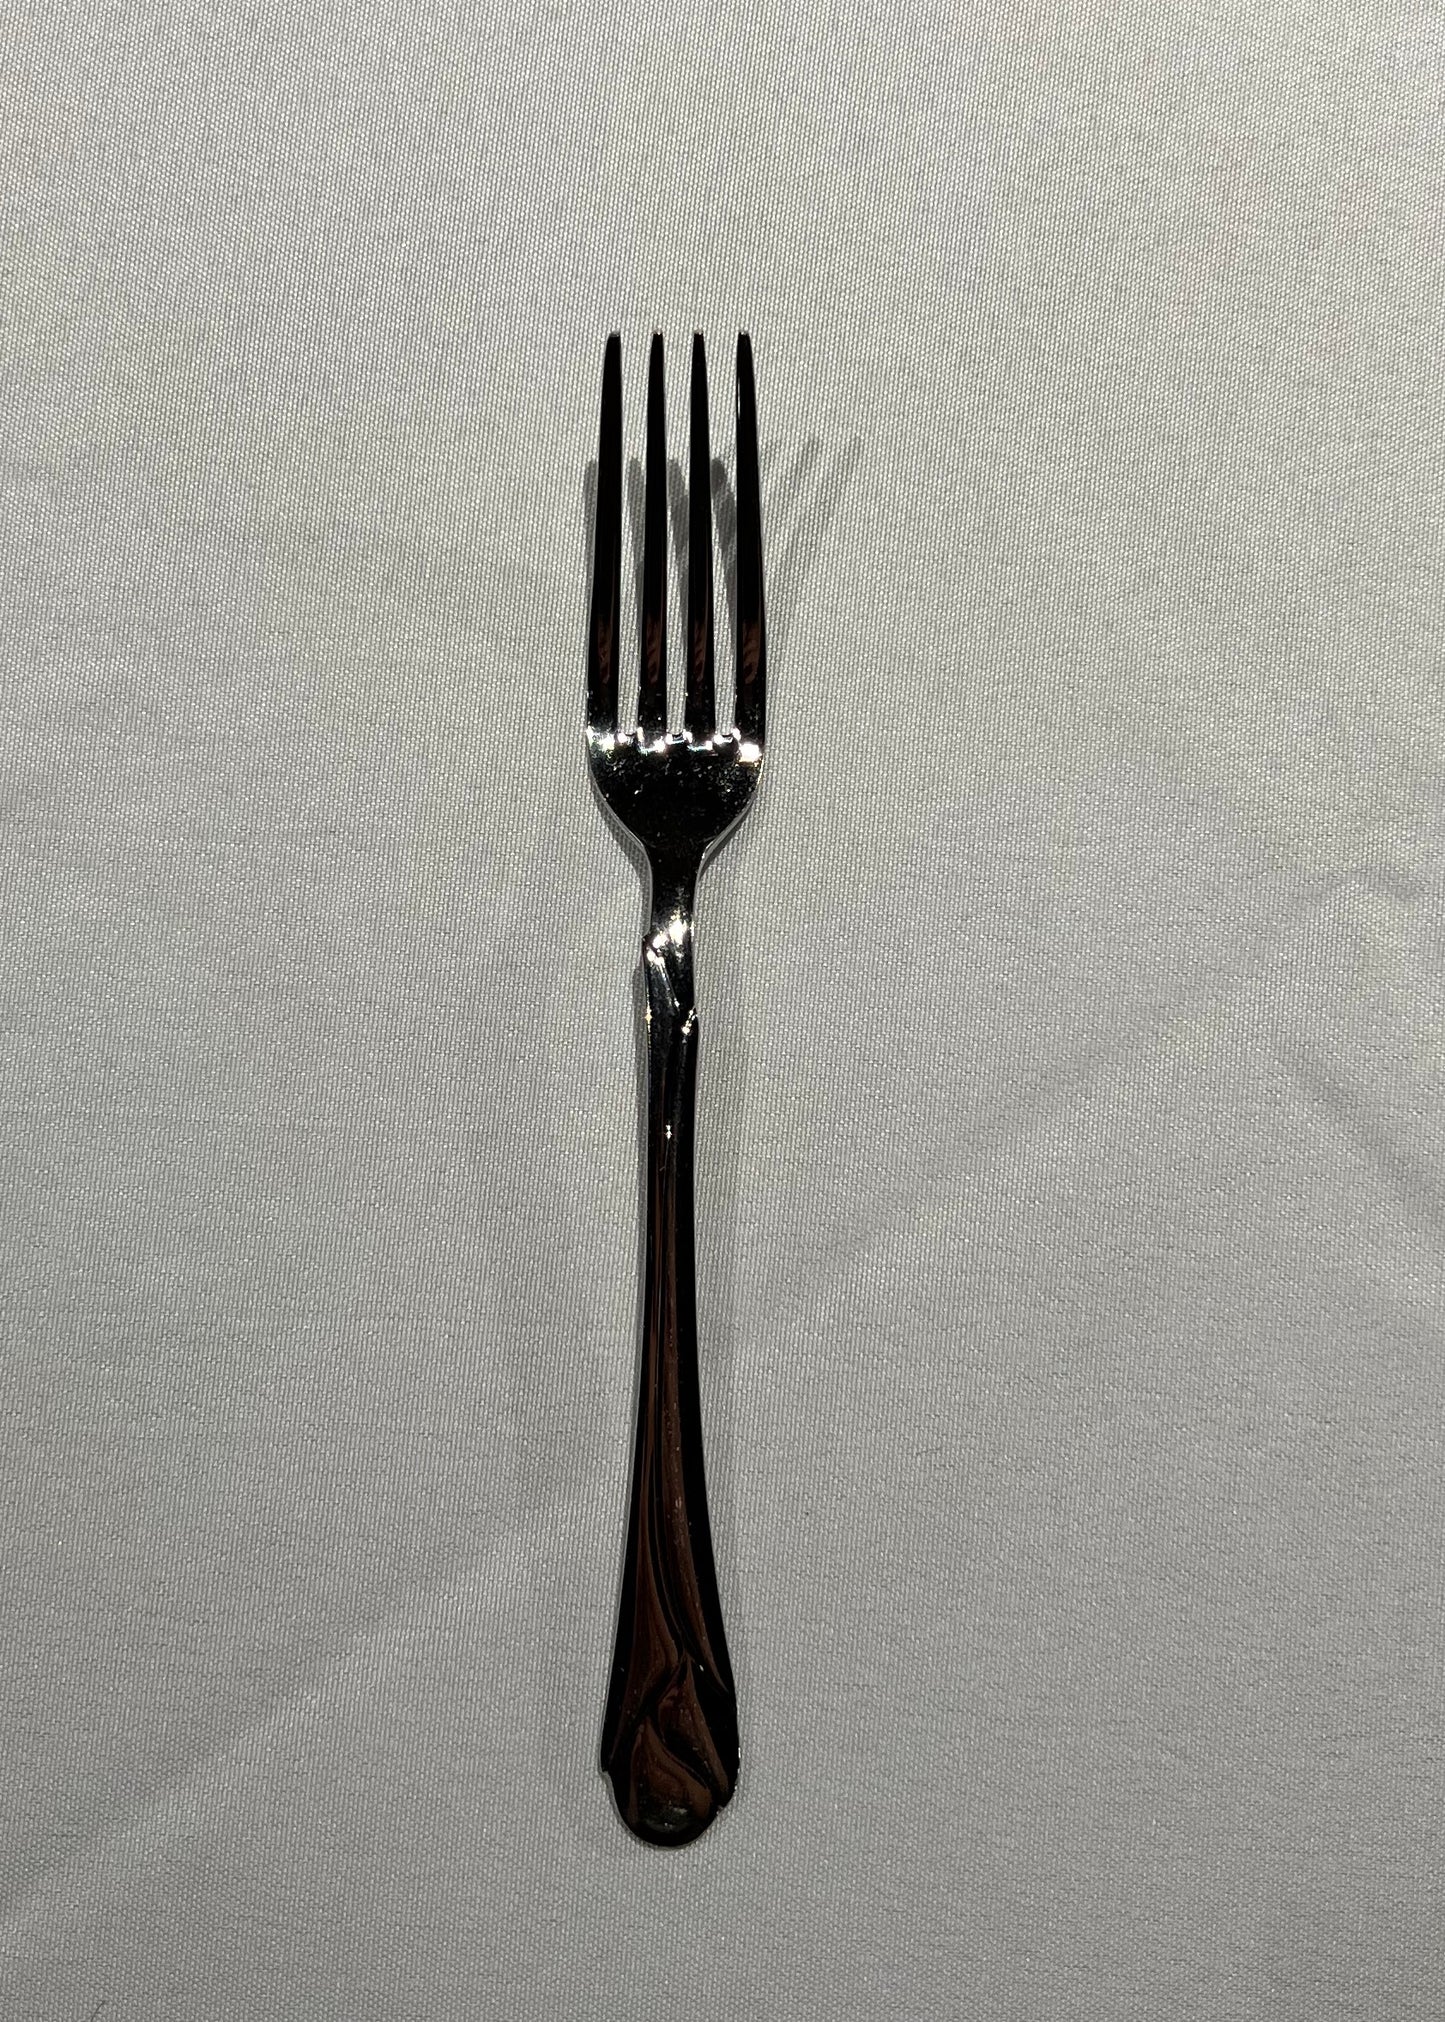 Stainless Salad Fork